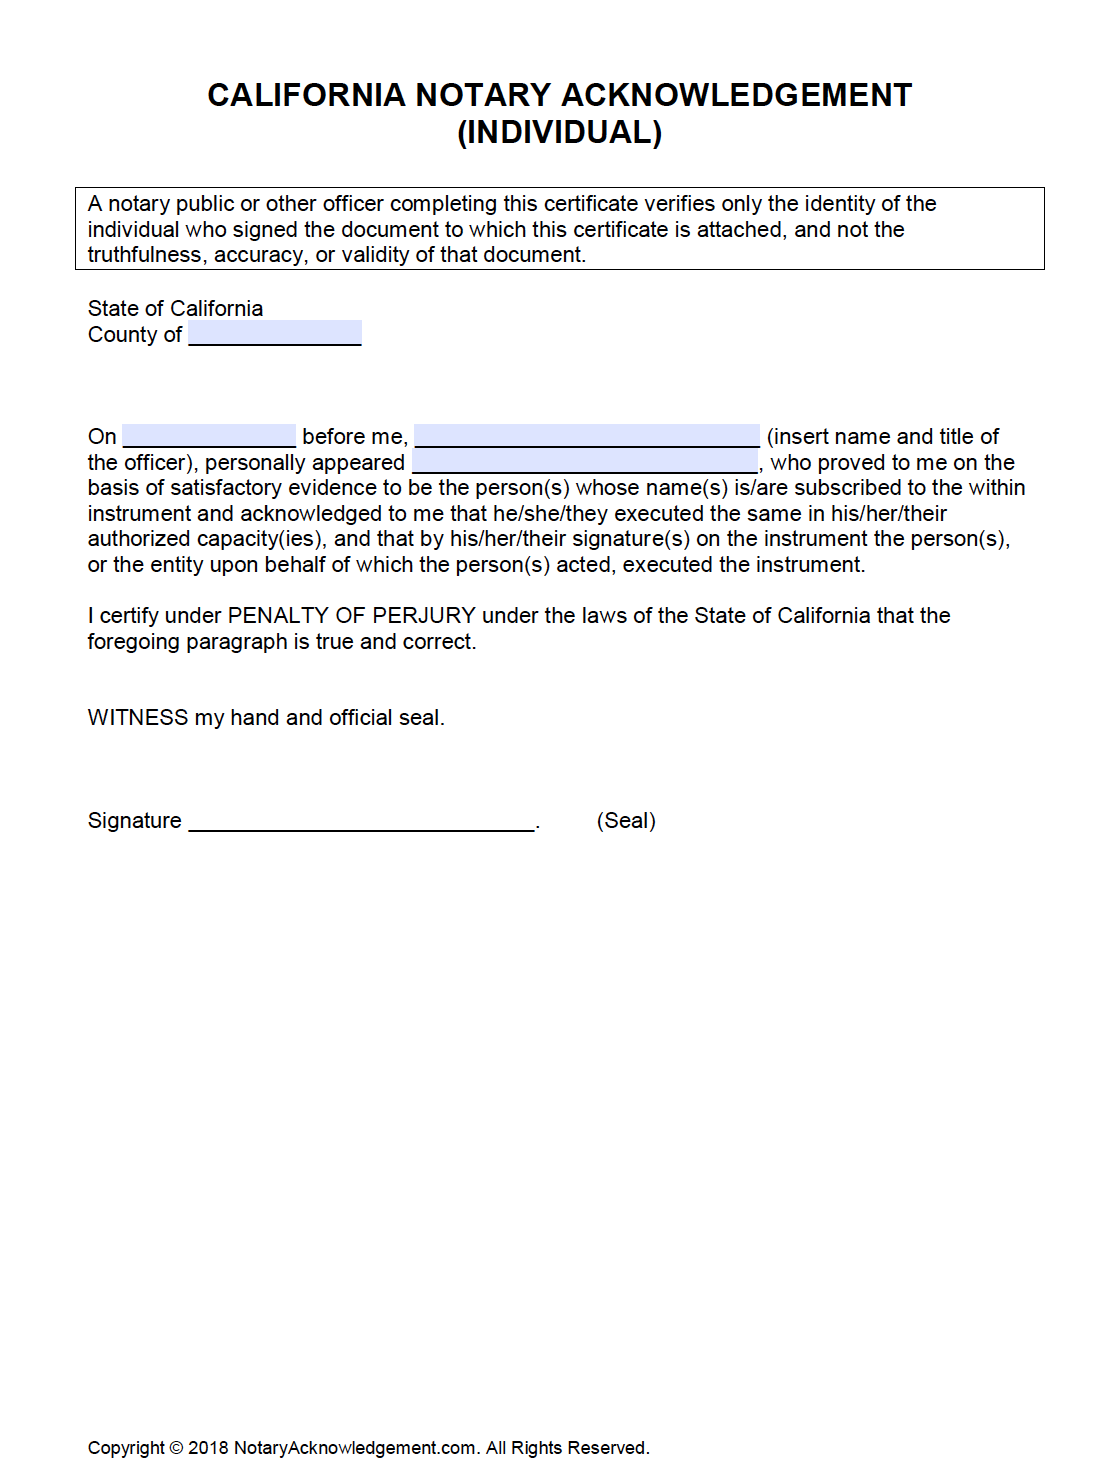 free-california-notary-acknowledgement-individual-pdf-word